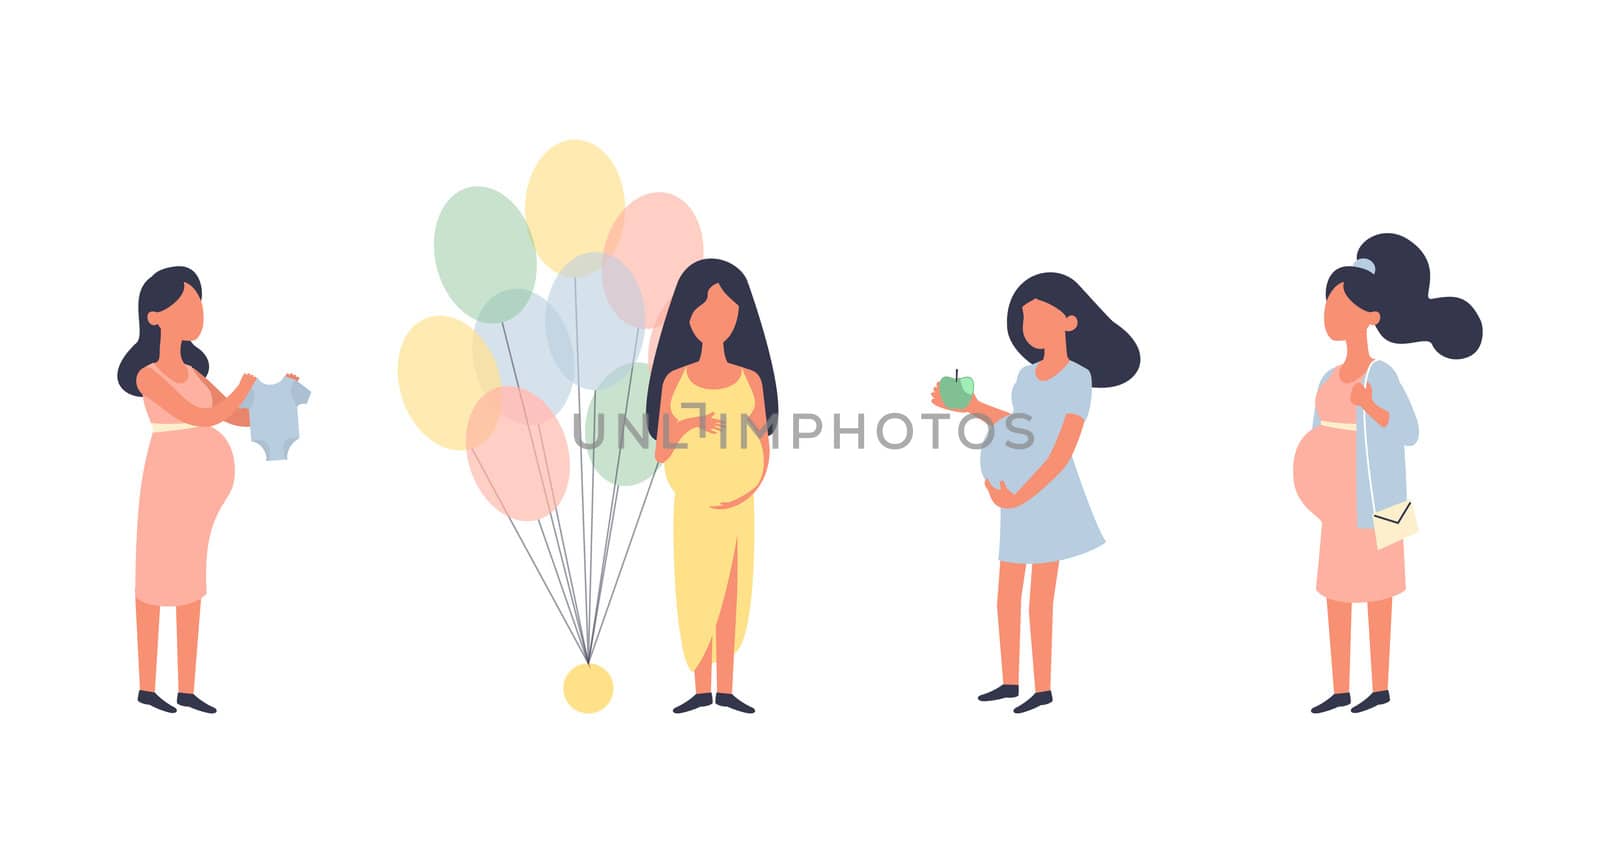 Pregnant woman. Pregnancy illustration set. Walking, healthy nutrition during pregnancy, purchase, baby shower and other situations. Character design. Healthy lifestyle. Preparation for childbirth.